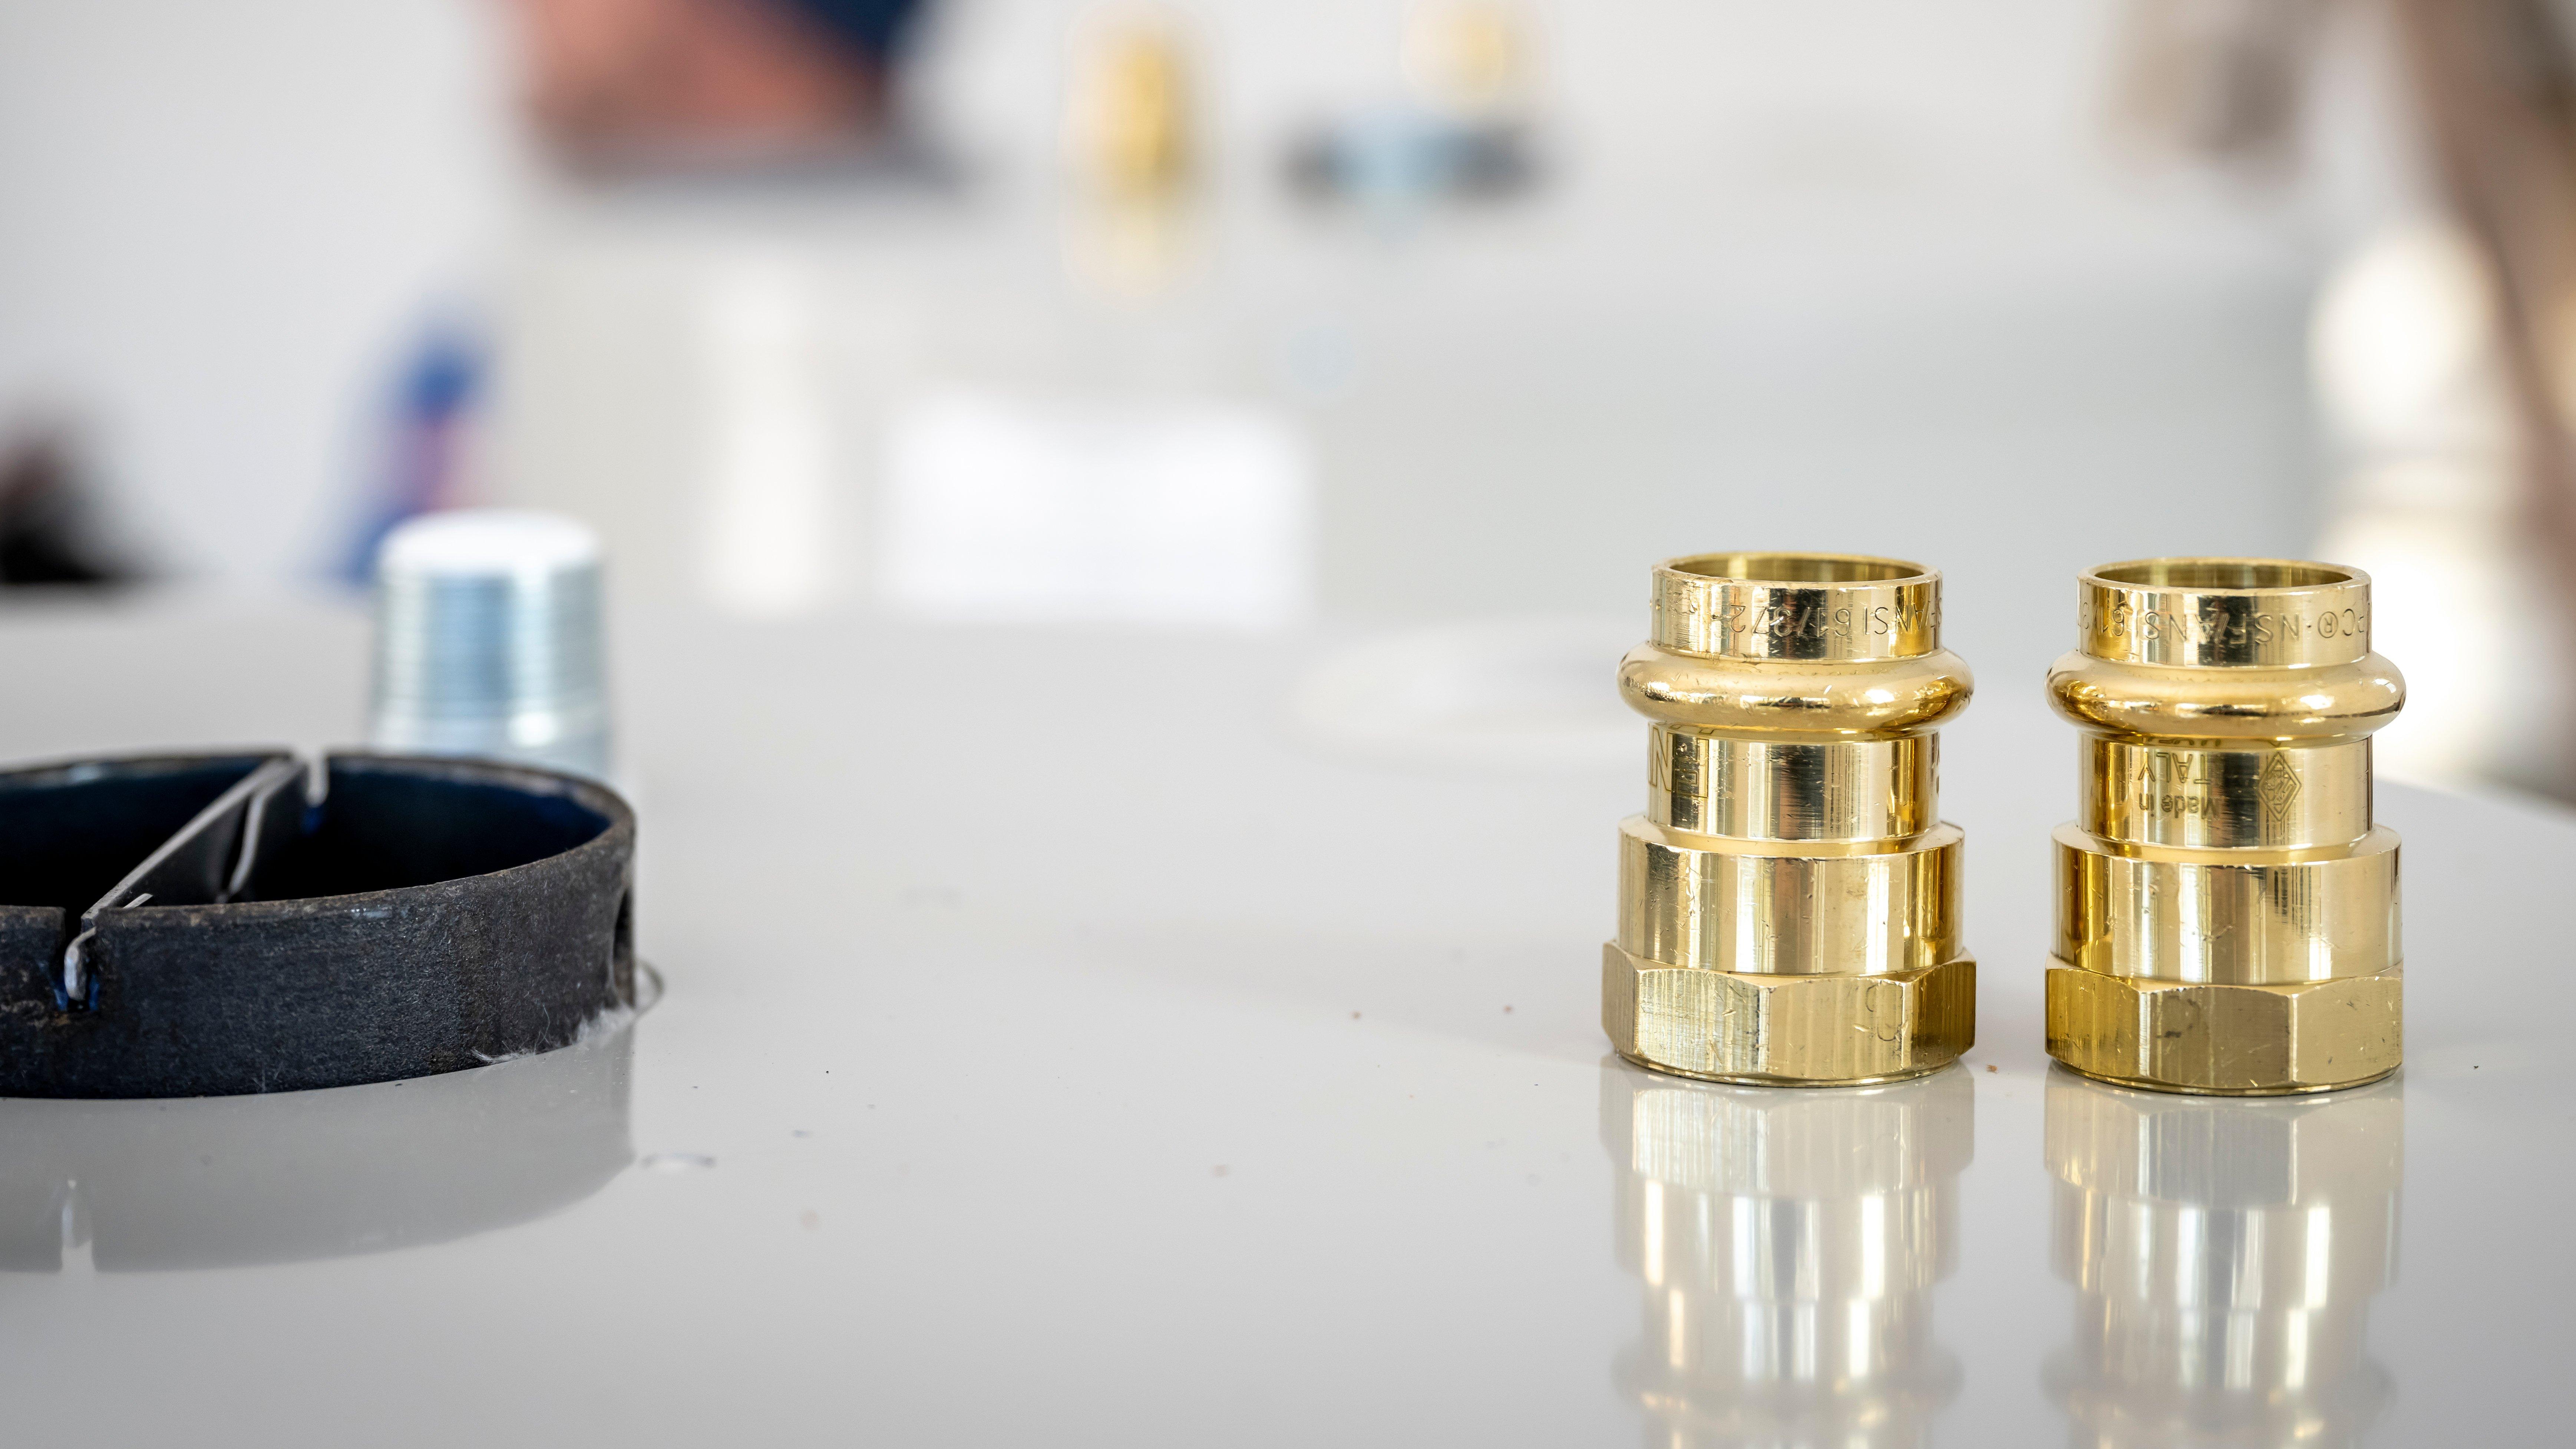 Brass water heater valves sit on top of a water heater